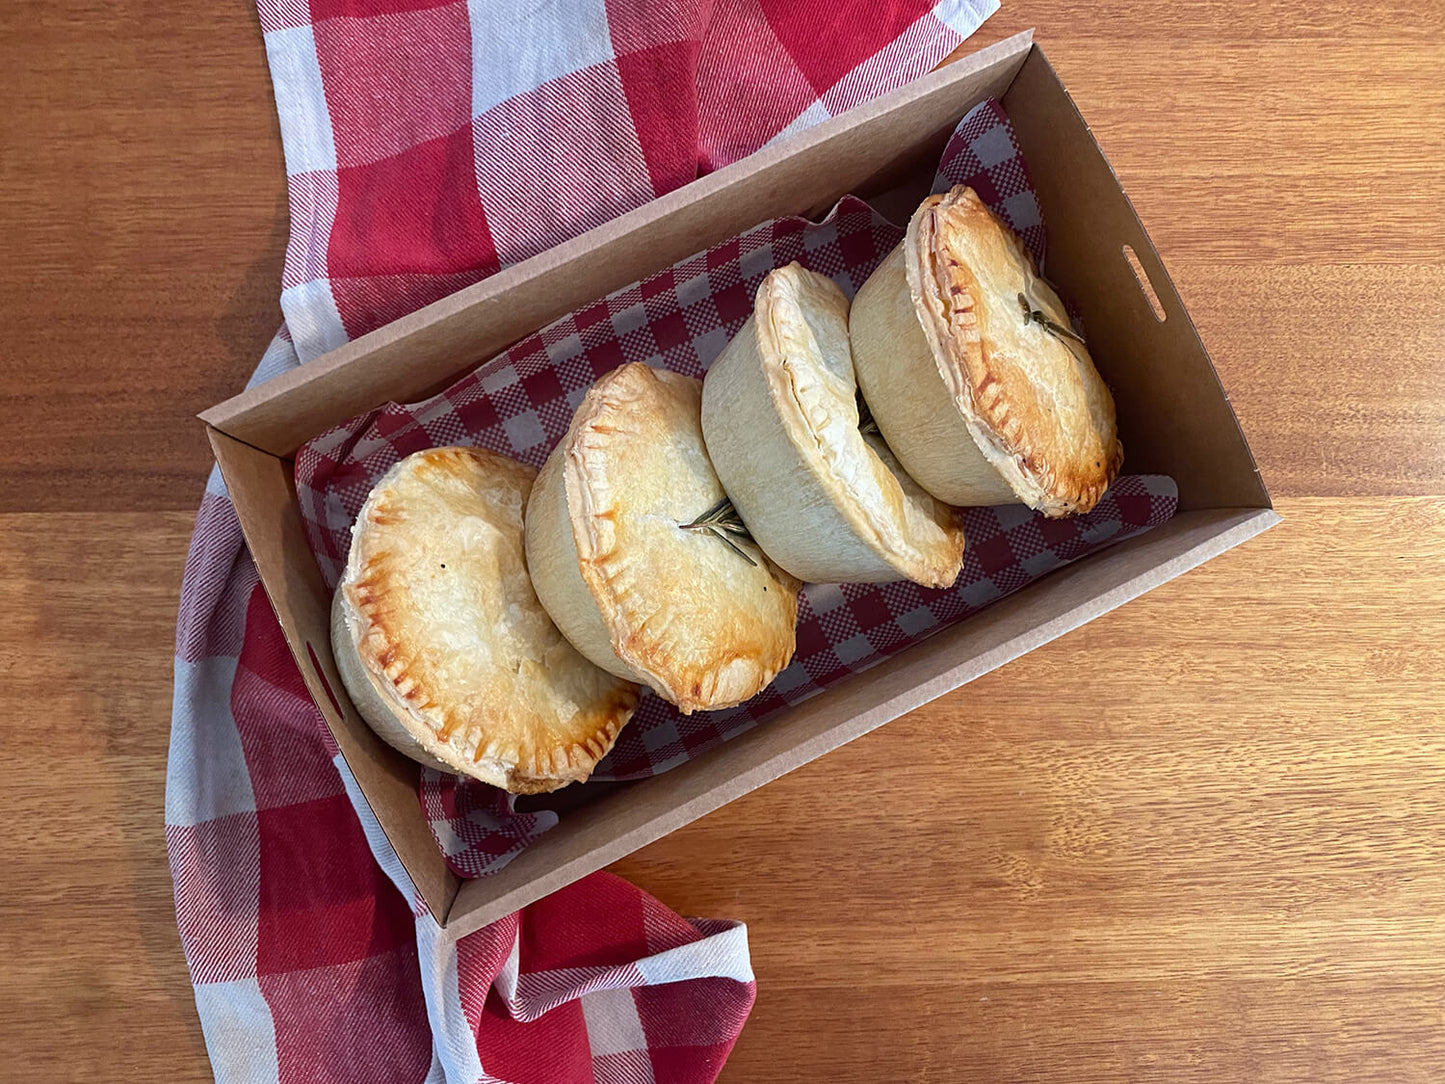 Savoury Pack - Slow Lamb and Rosemary Pies (4)